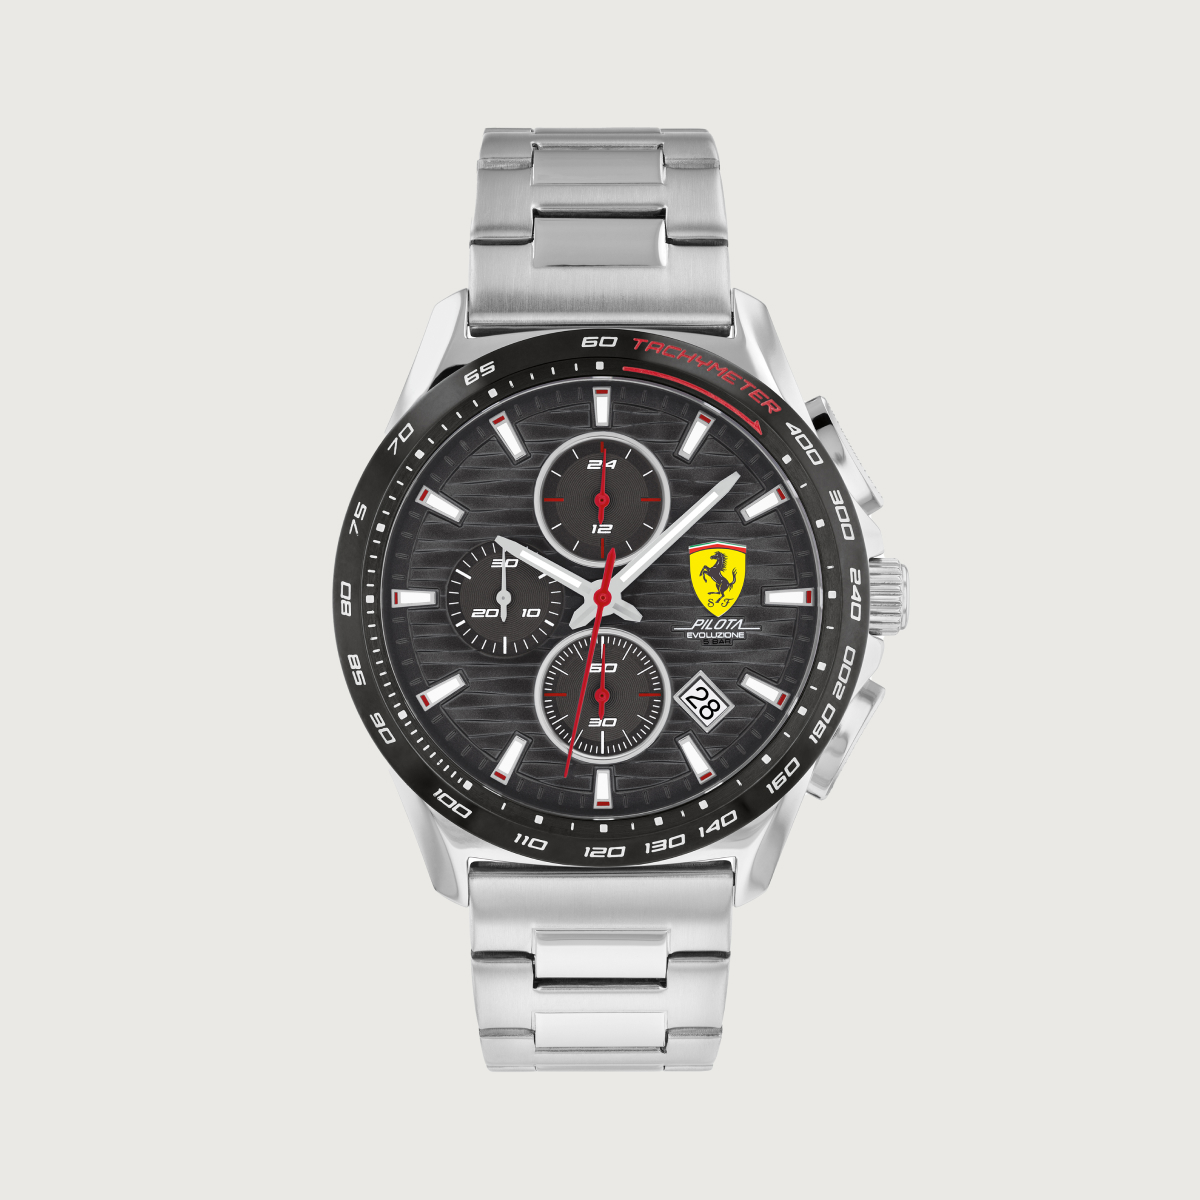 Pilota Evo cronograph watch with grey dial and steel band